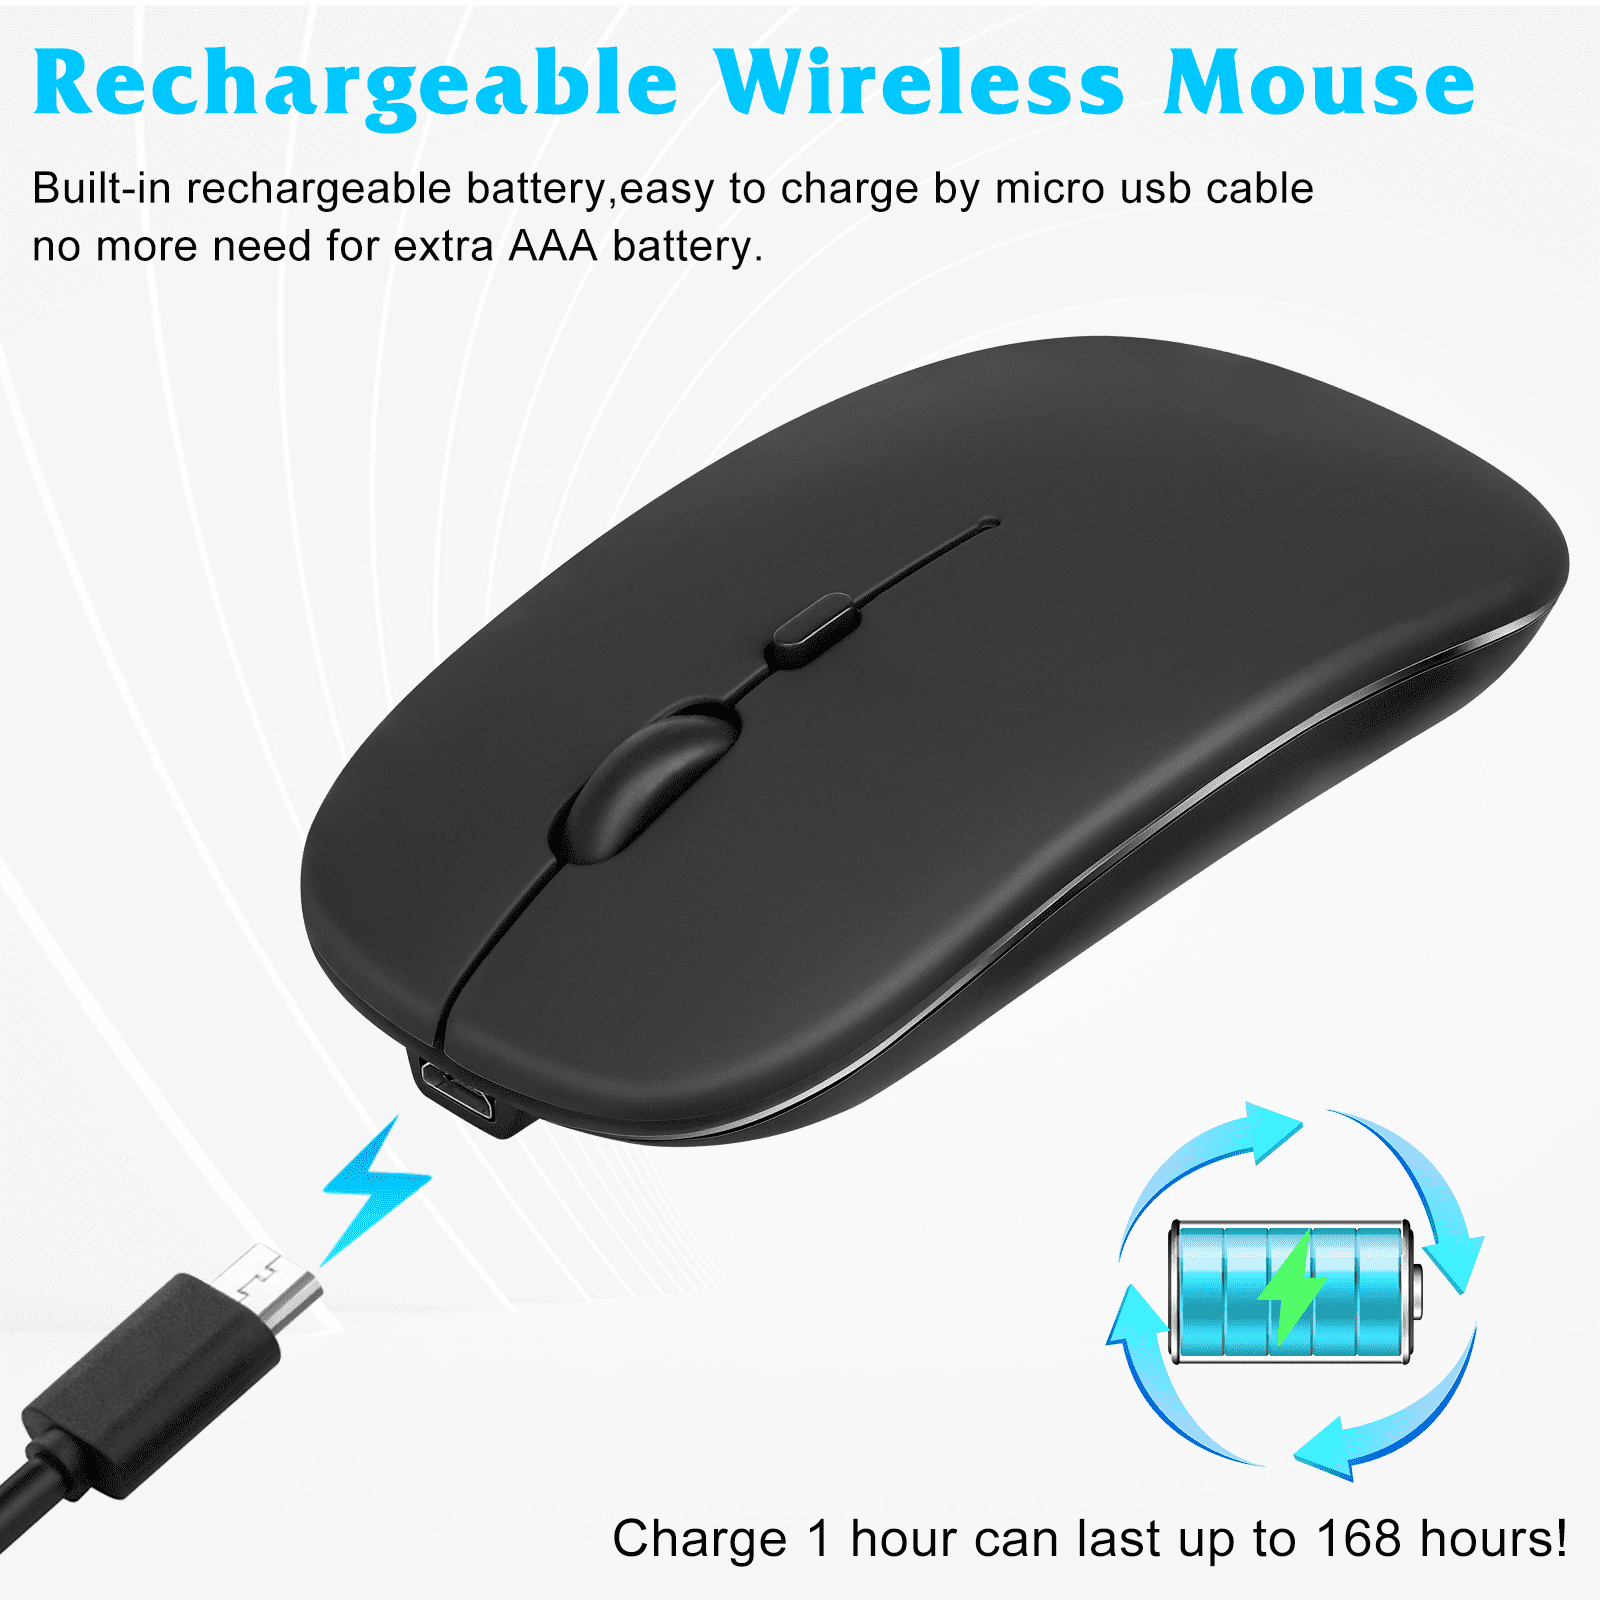 Bluetooth Mouse, Rechargeable Wireless Mouse Fire HD 10 Tablet Bluetooth Wireless Mouse Designed for Laptop / PC / Mac / iPad pro / Computer / Tablet / Android - Black - Walmart.com